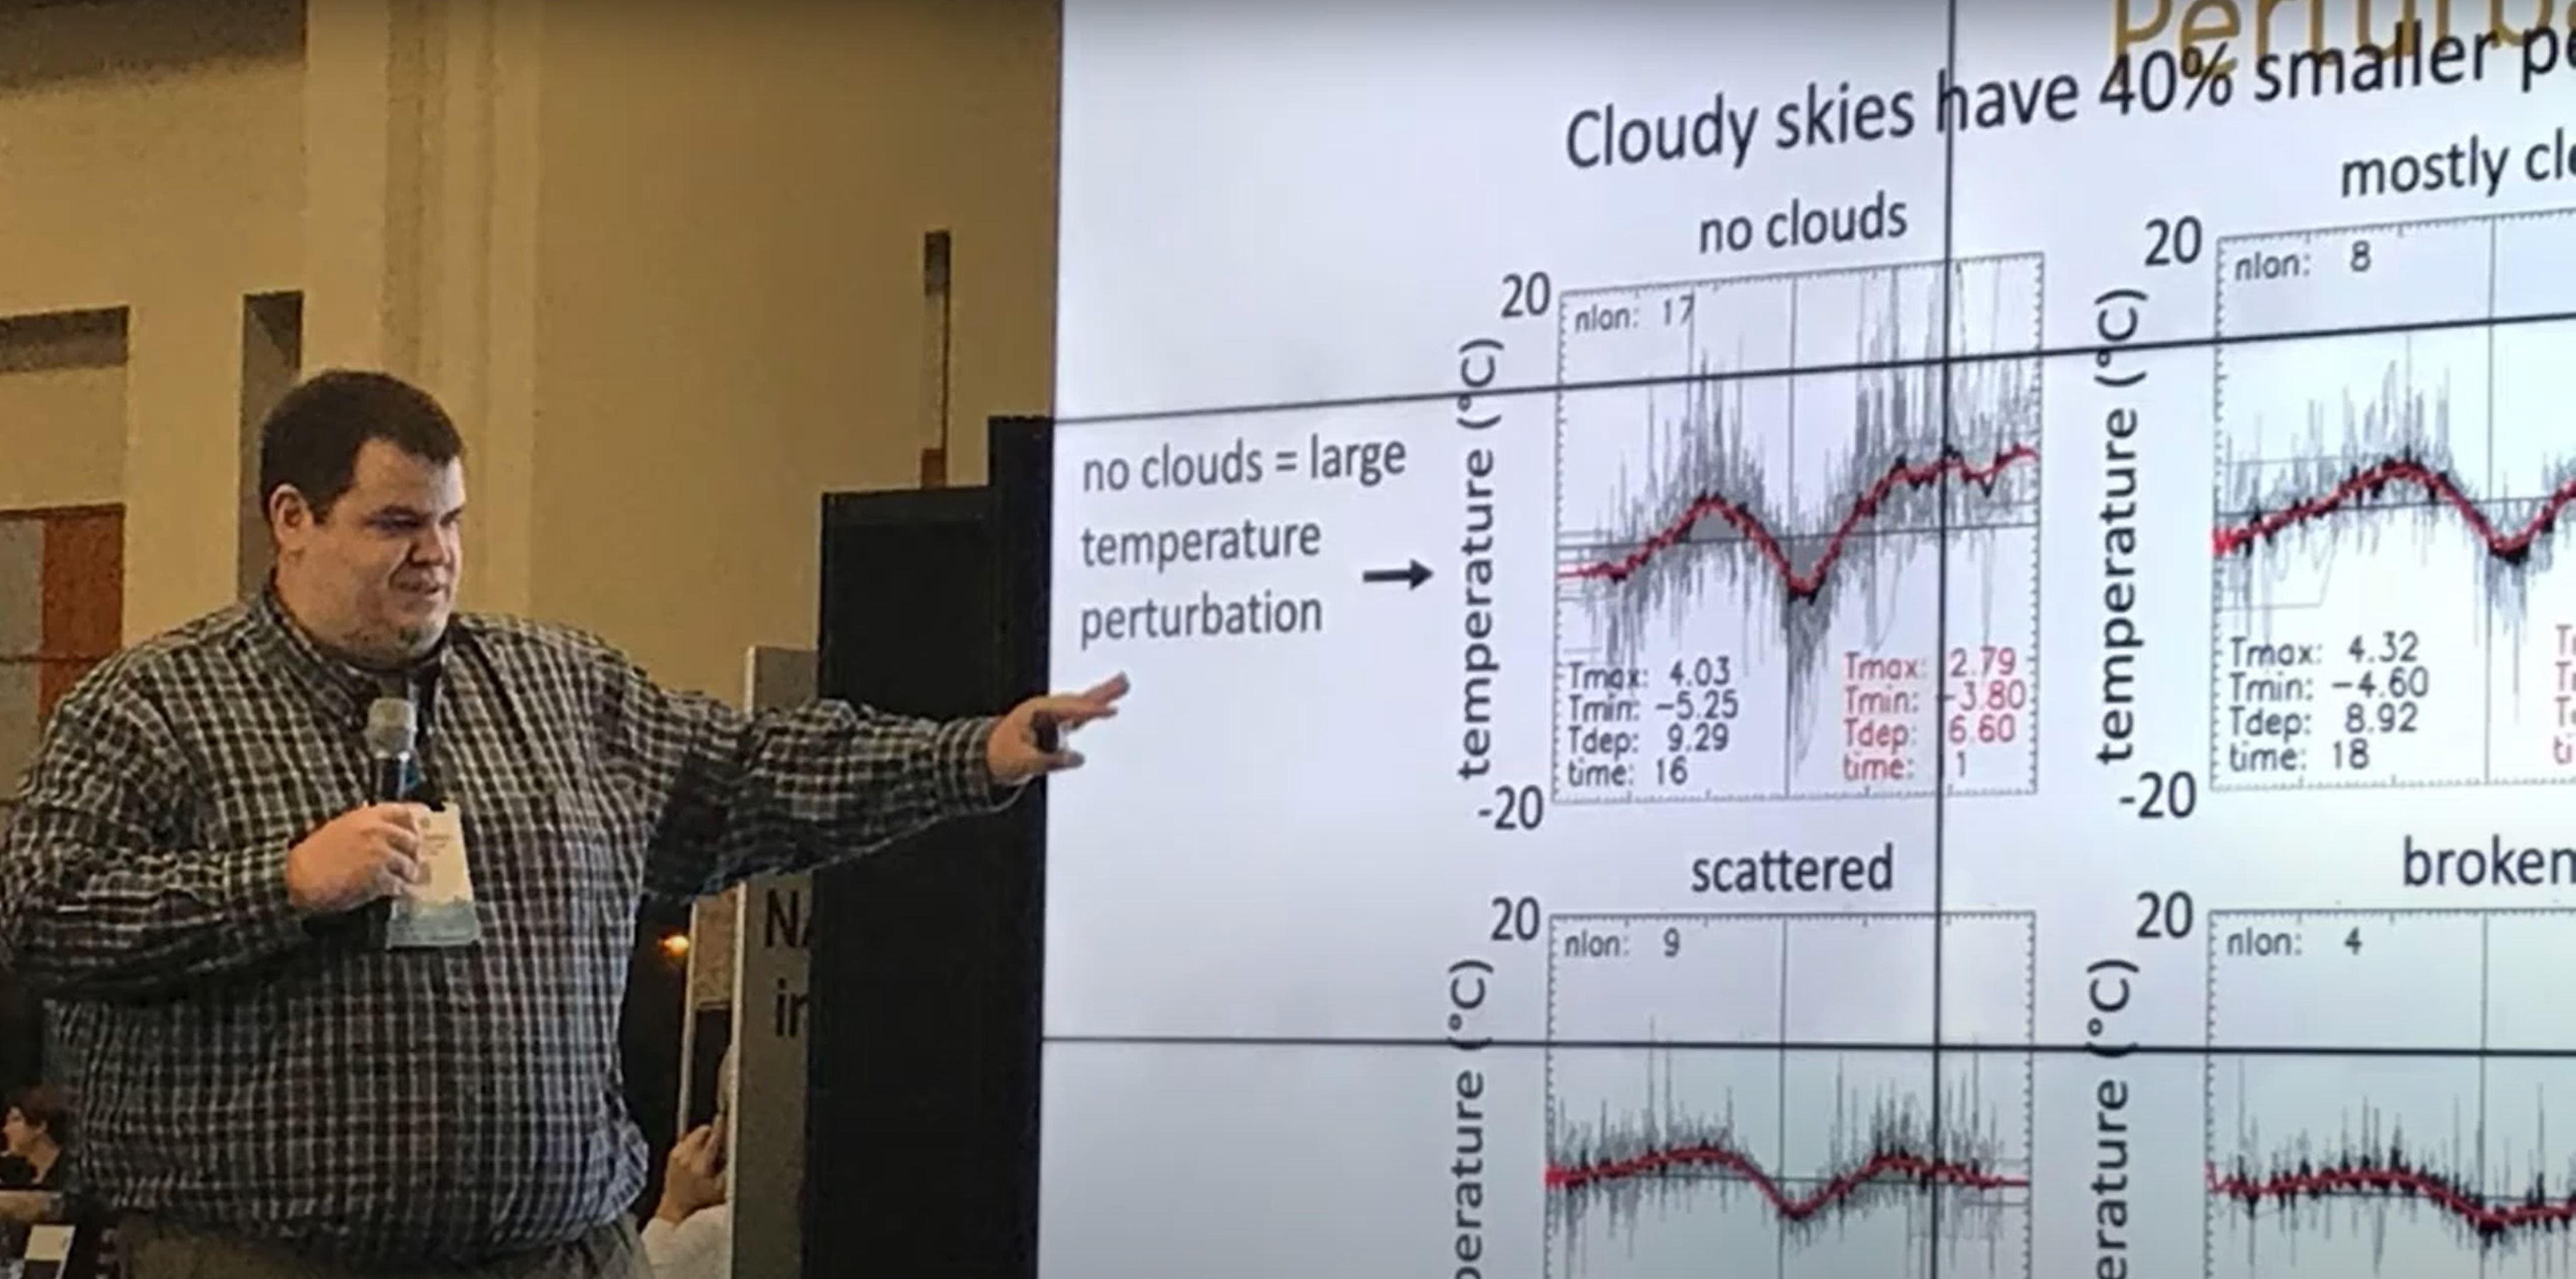  A man points at a screen with graphs of clouds and air temperature.